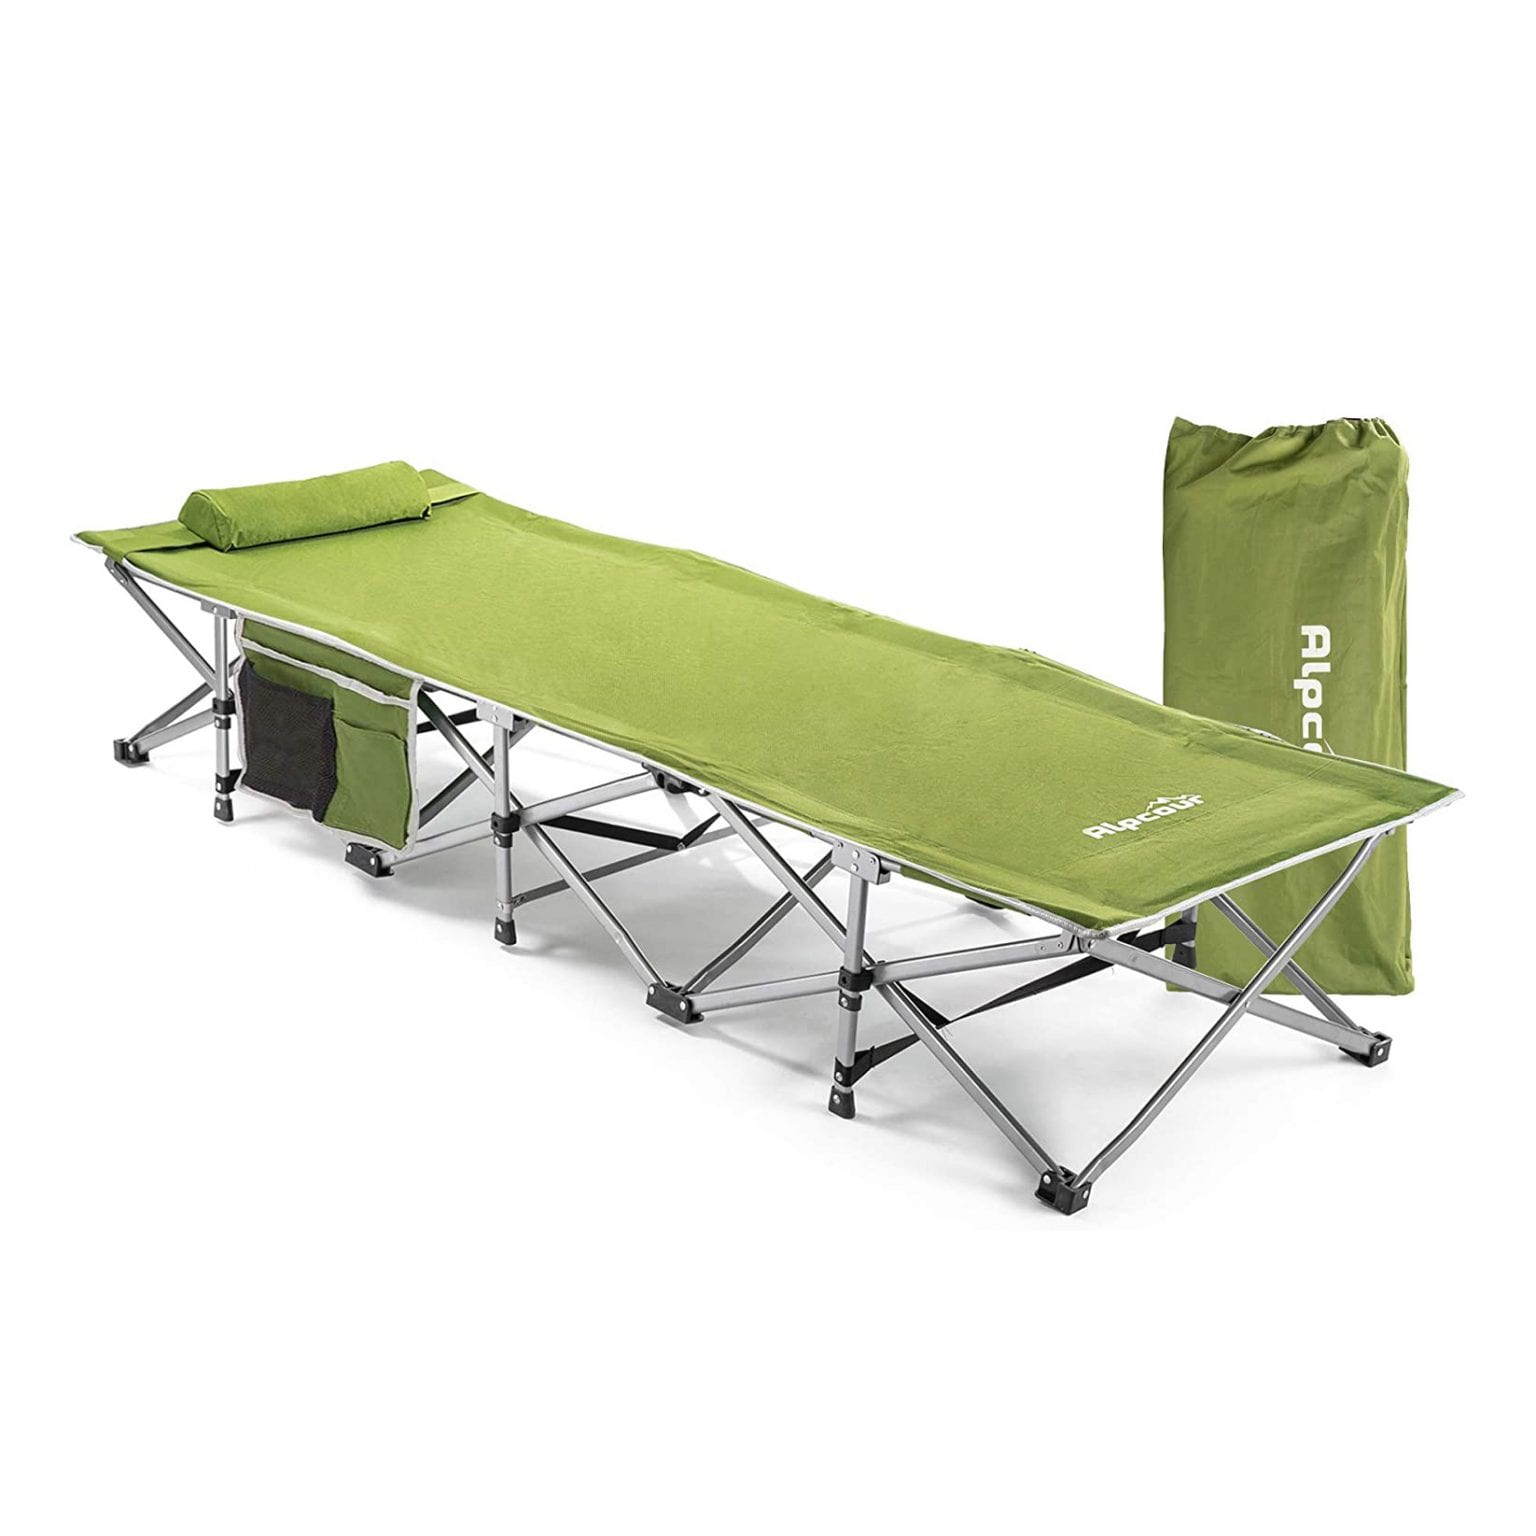 6. Alpcour Extra Strong Folding Camping Cot 1536x1536 